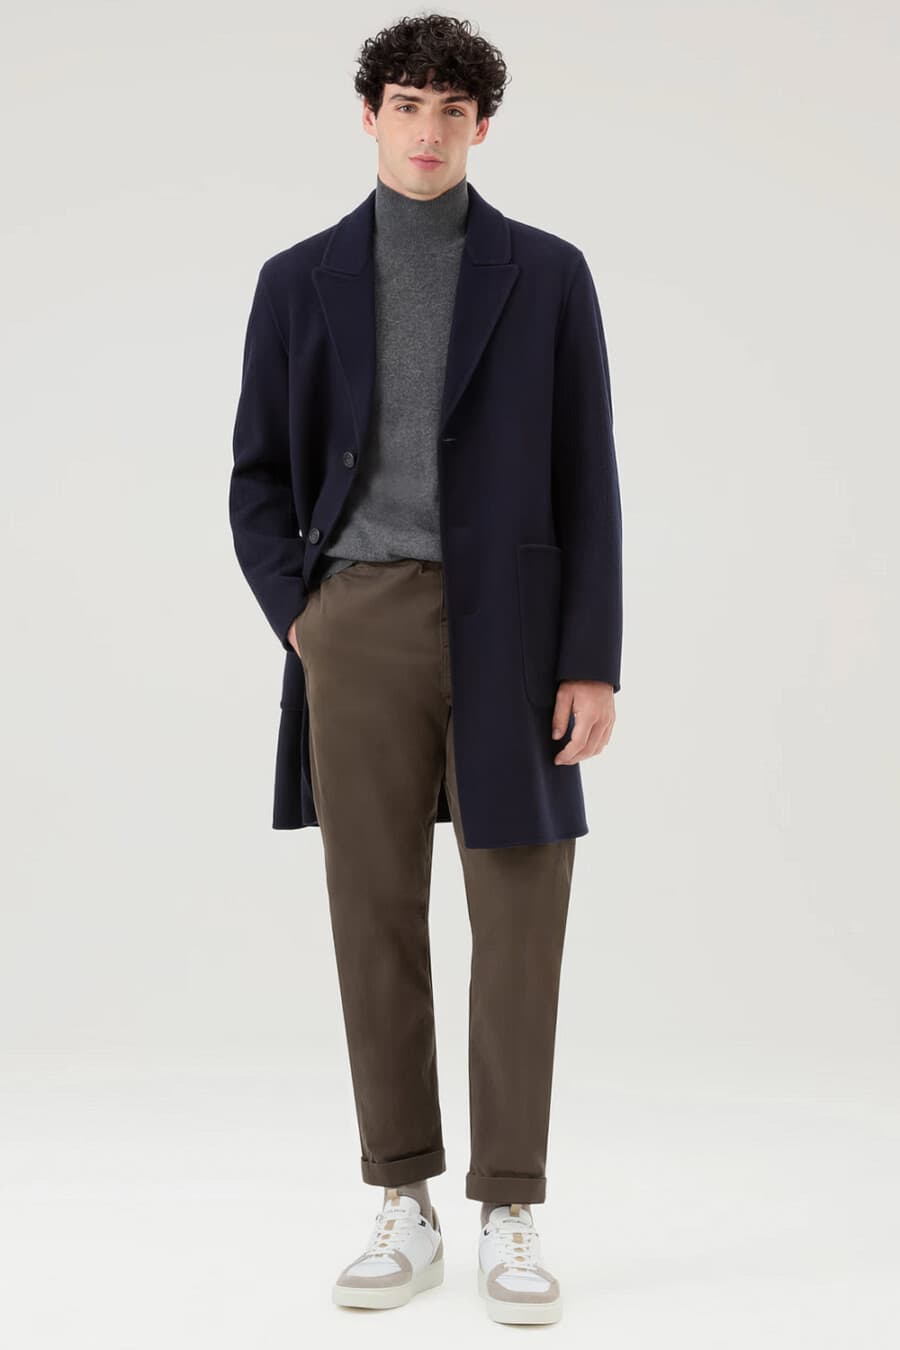 Men's brown pants, grey turtleneck, navy overcoat and white chunky sneakers outfit